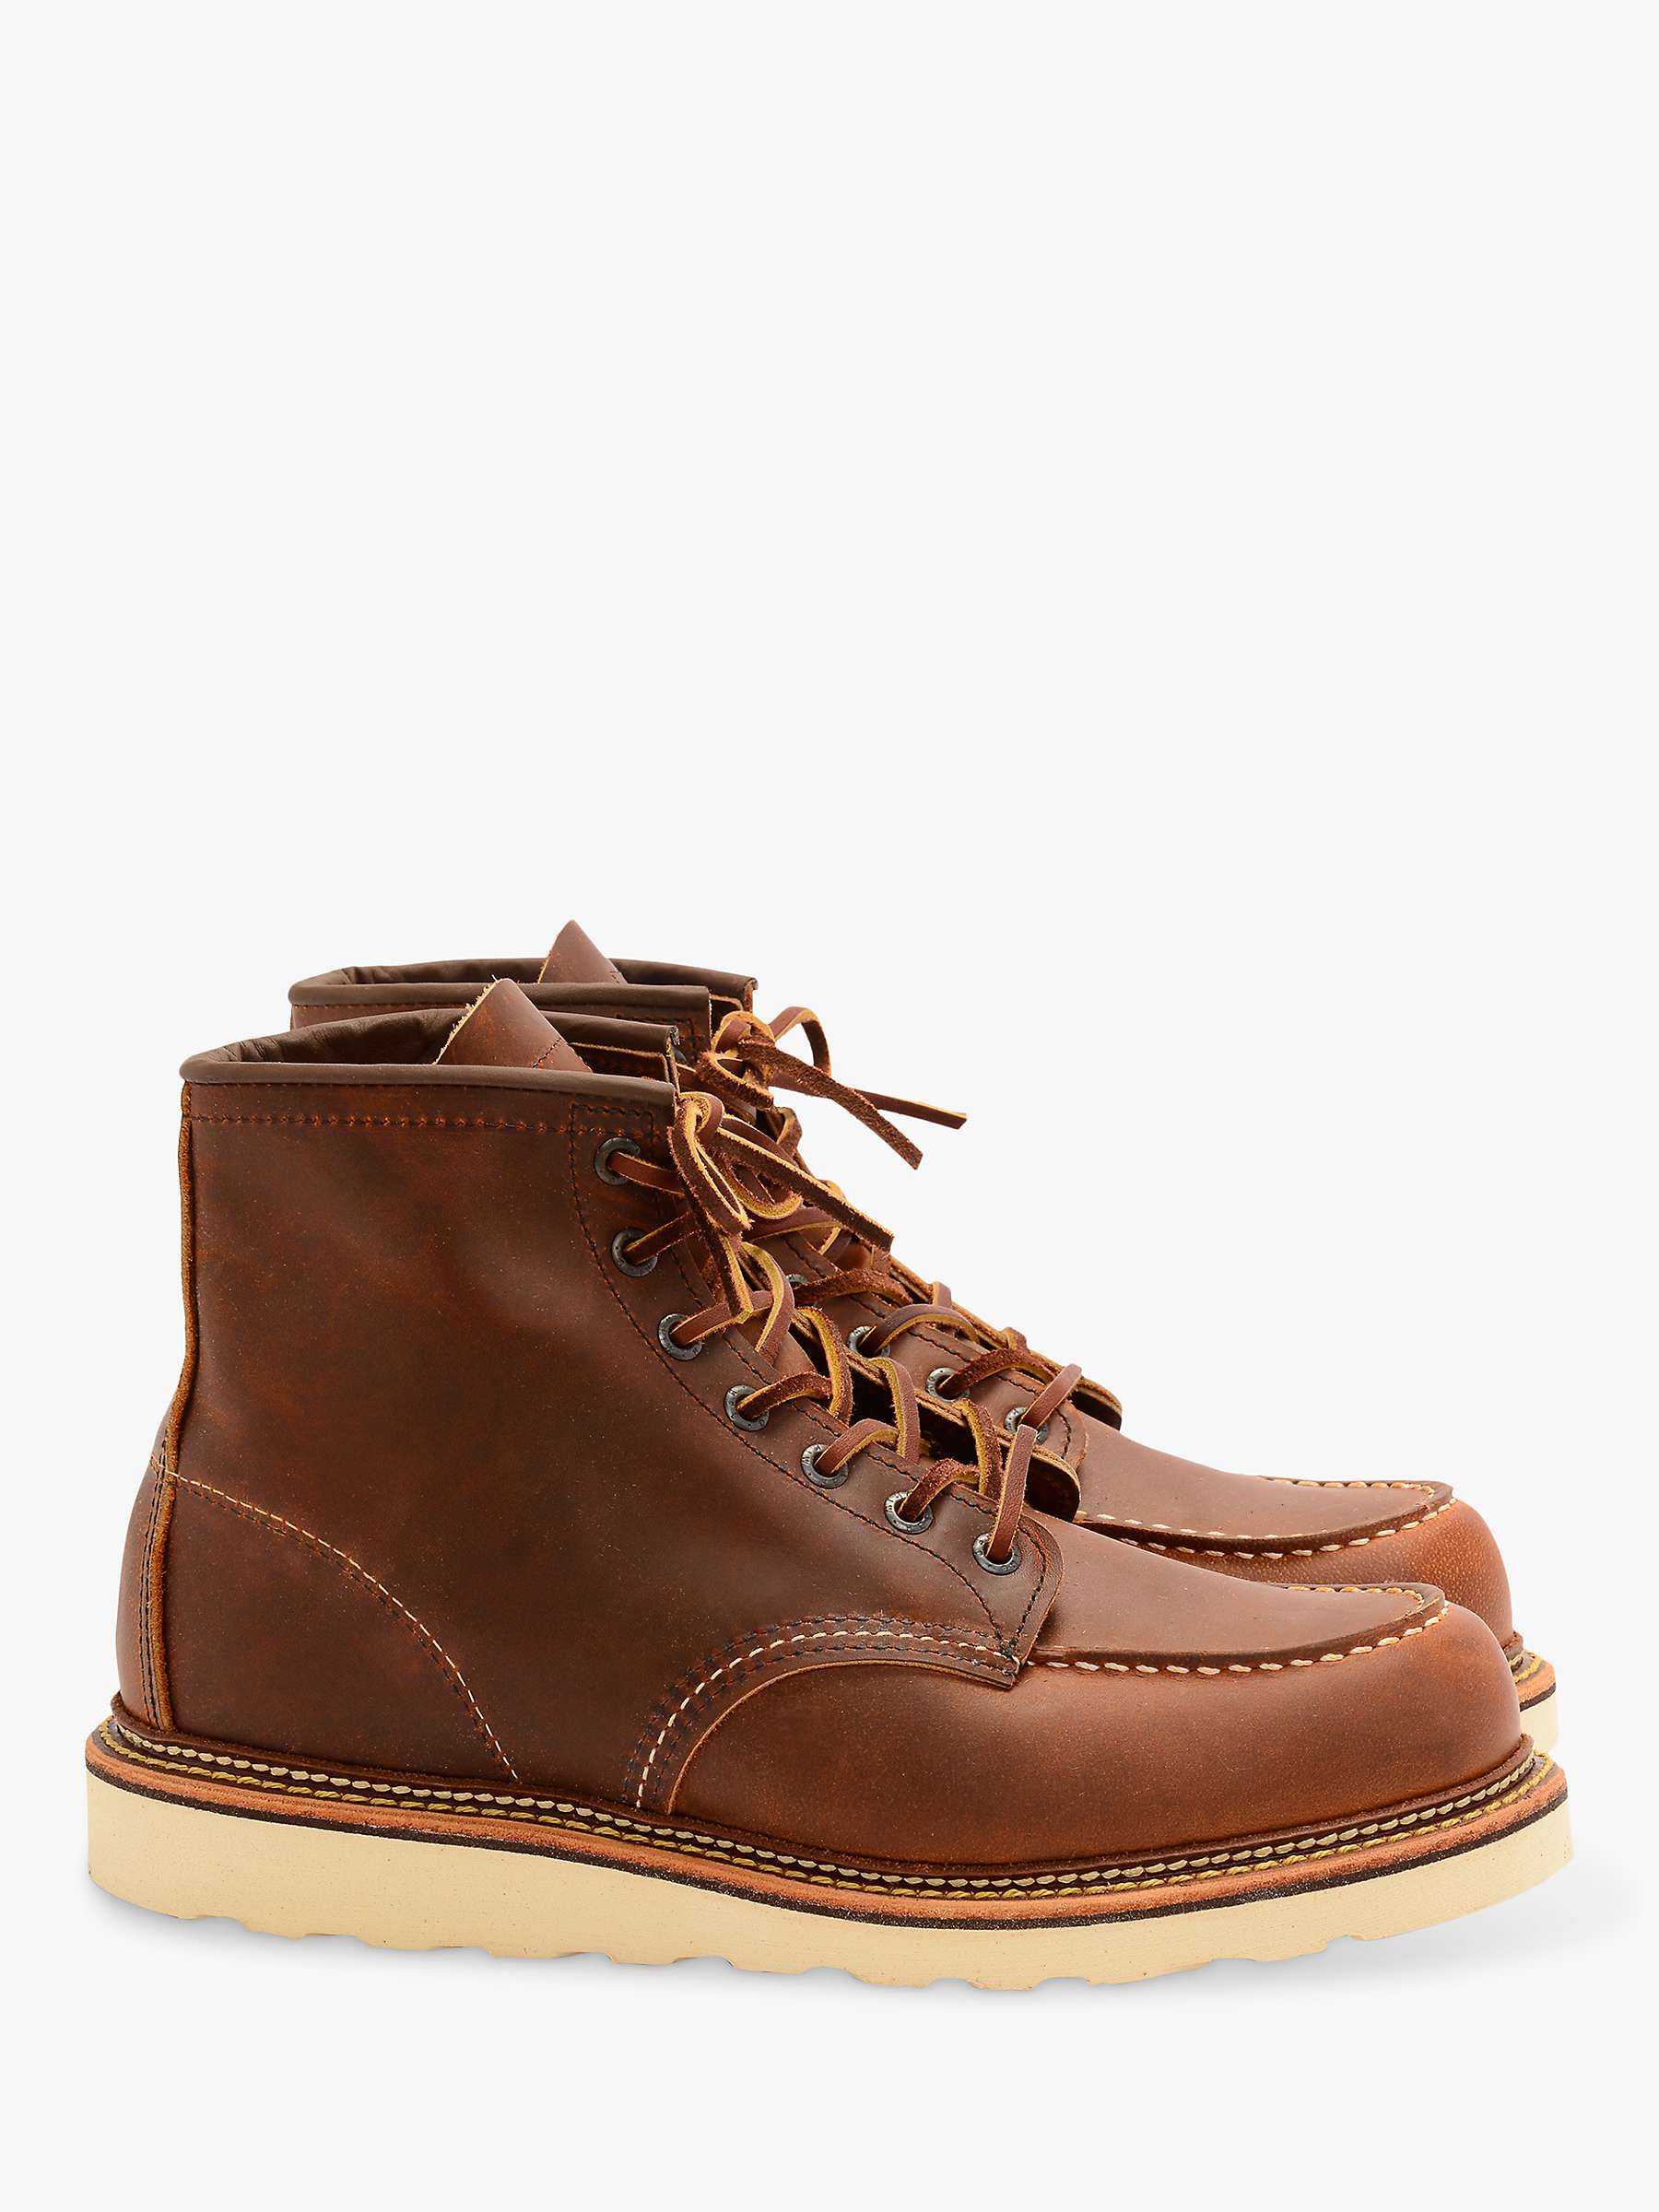 Buy Red Wing 1907 Classic Moc Toe Boots, Copper Online at johnlewis.com